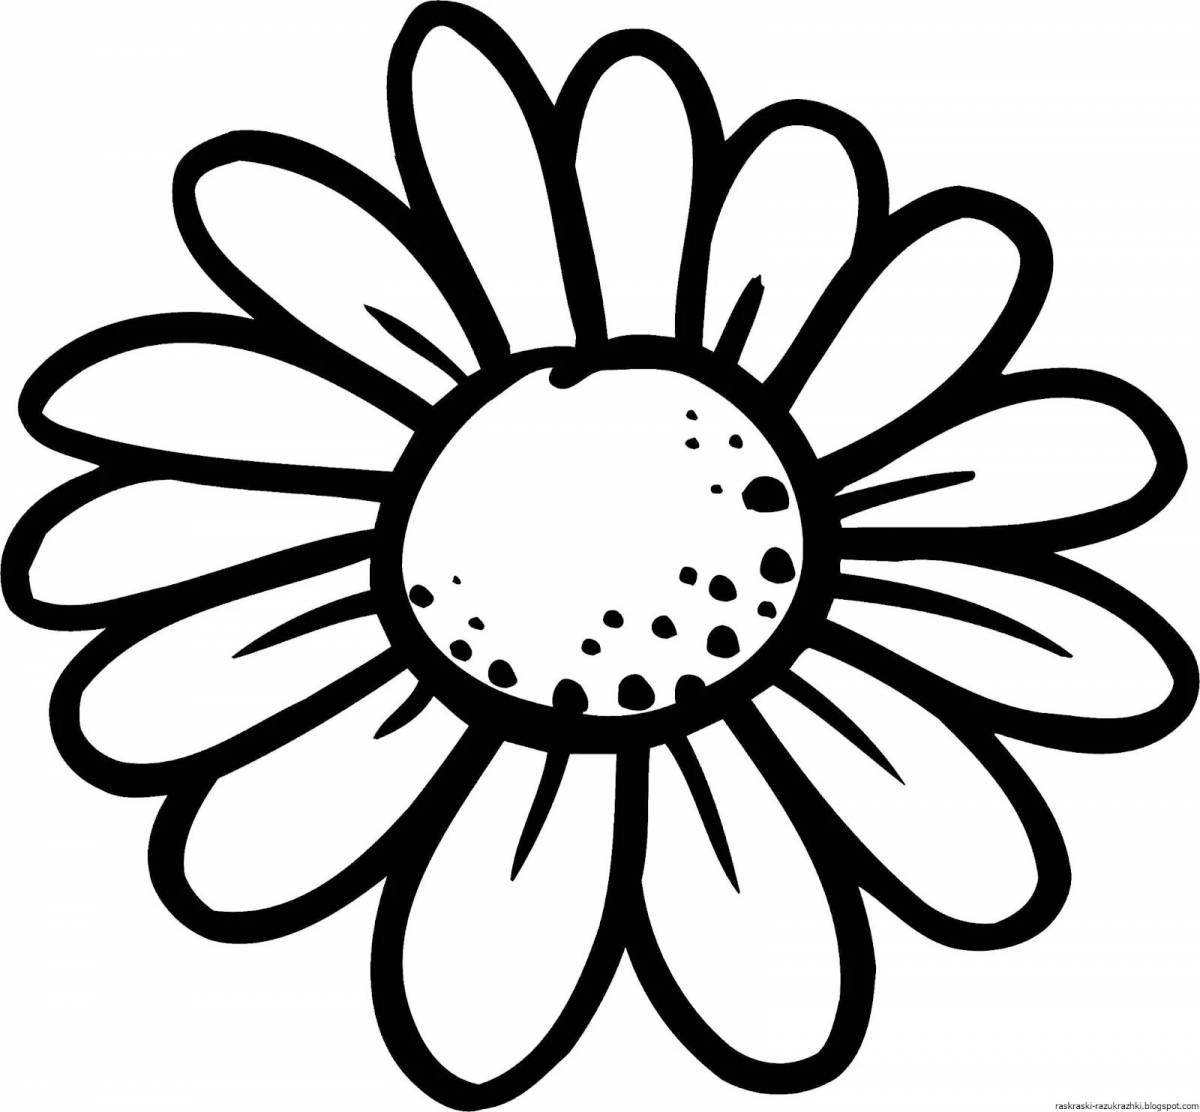 Bright daisy flower coloring book for kids